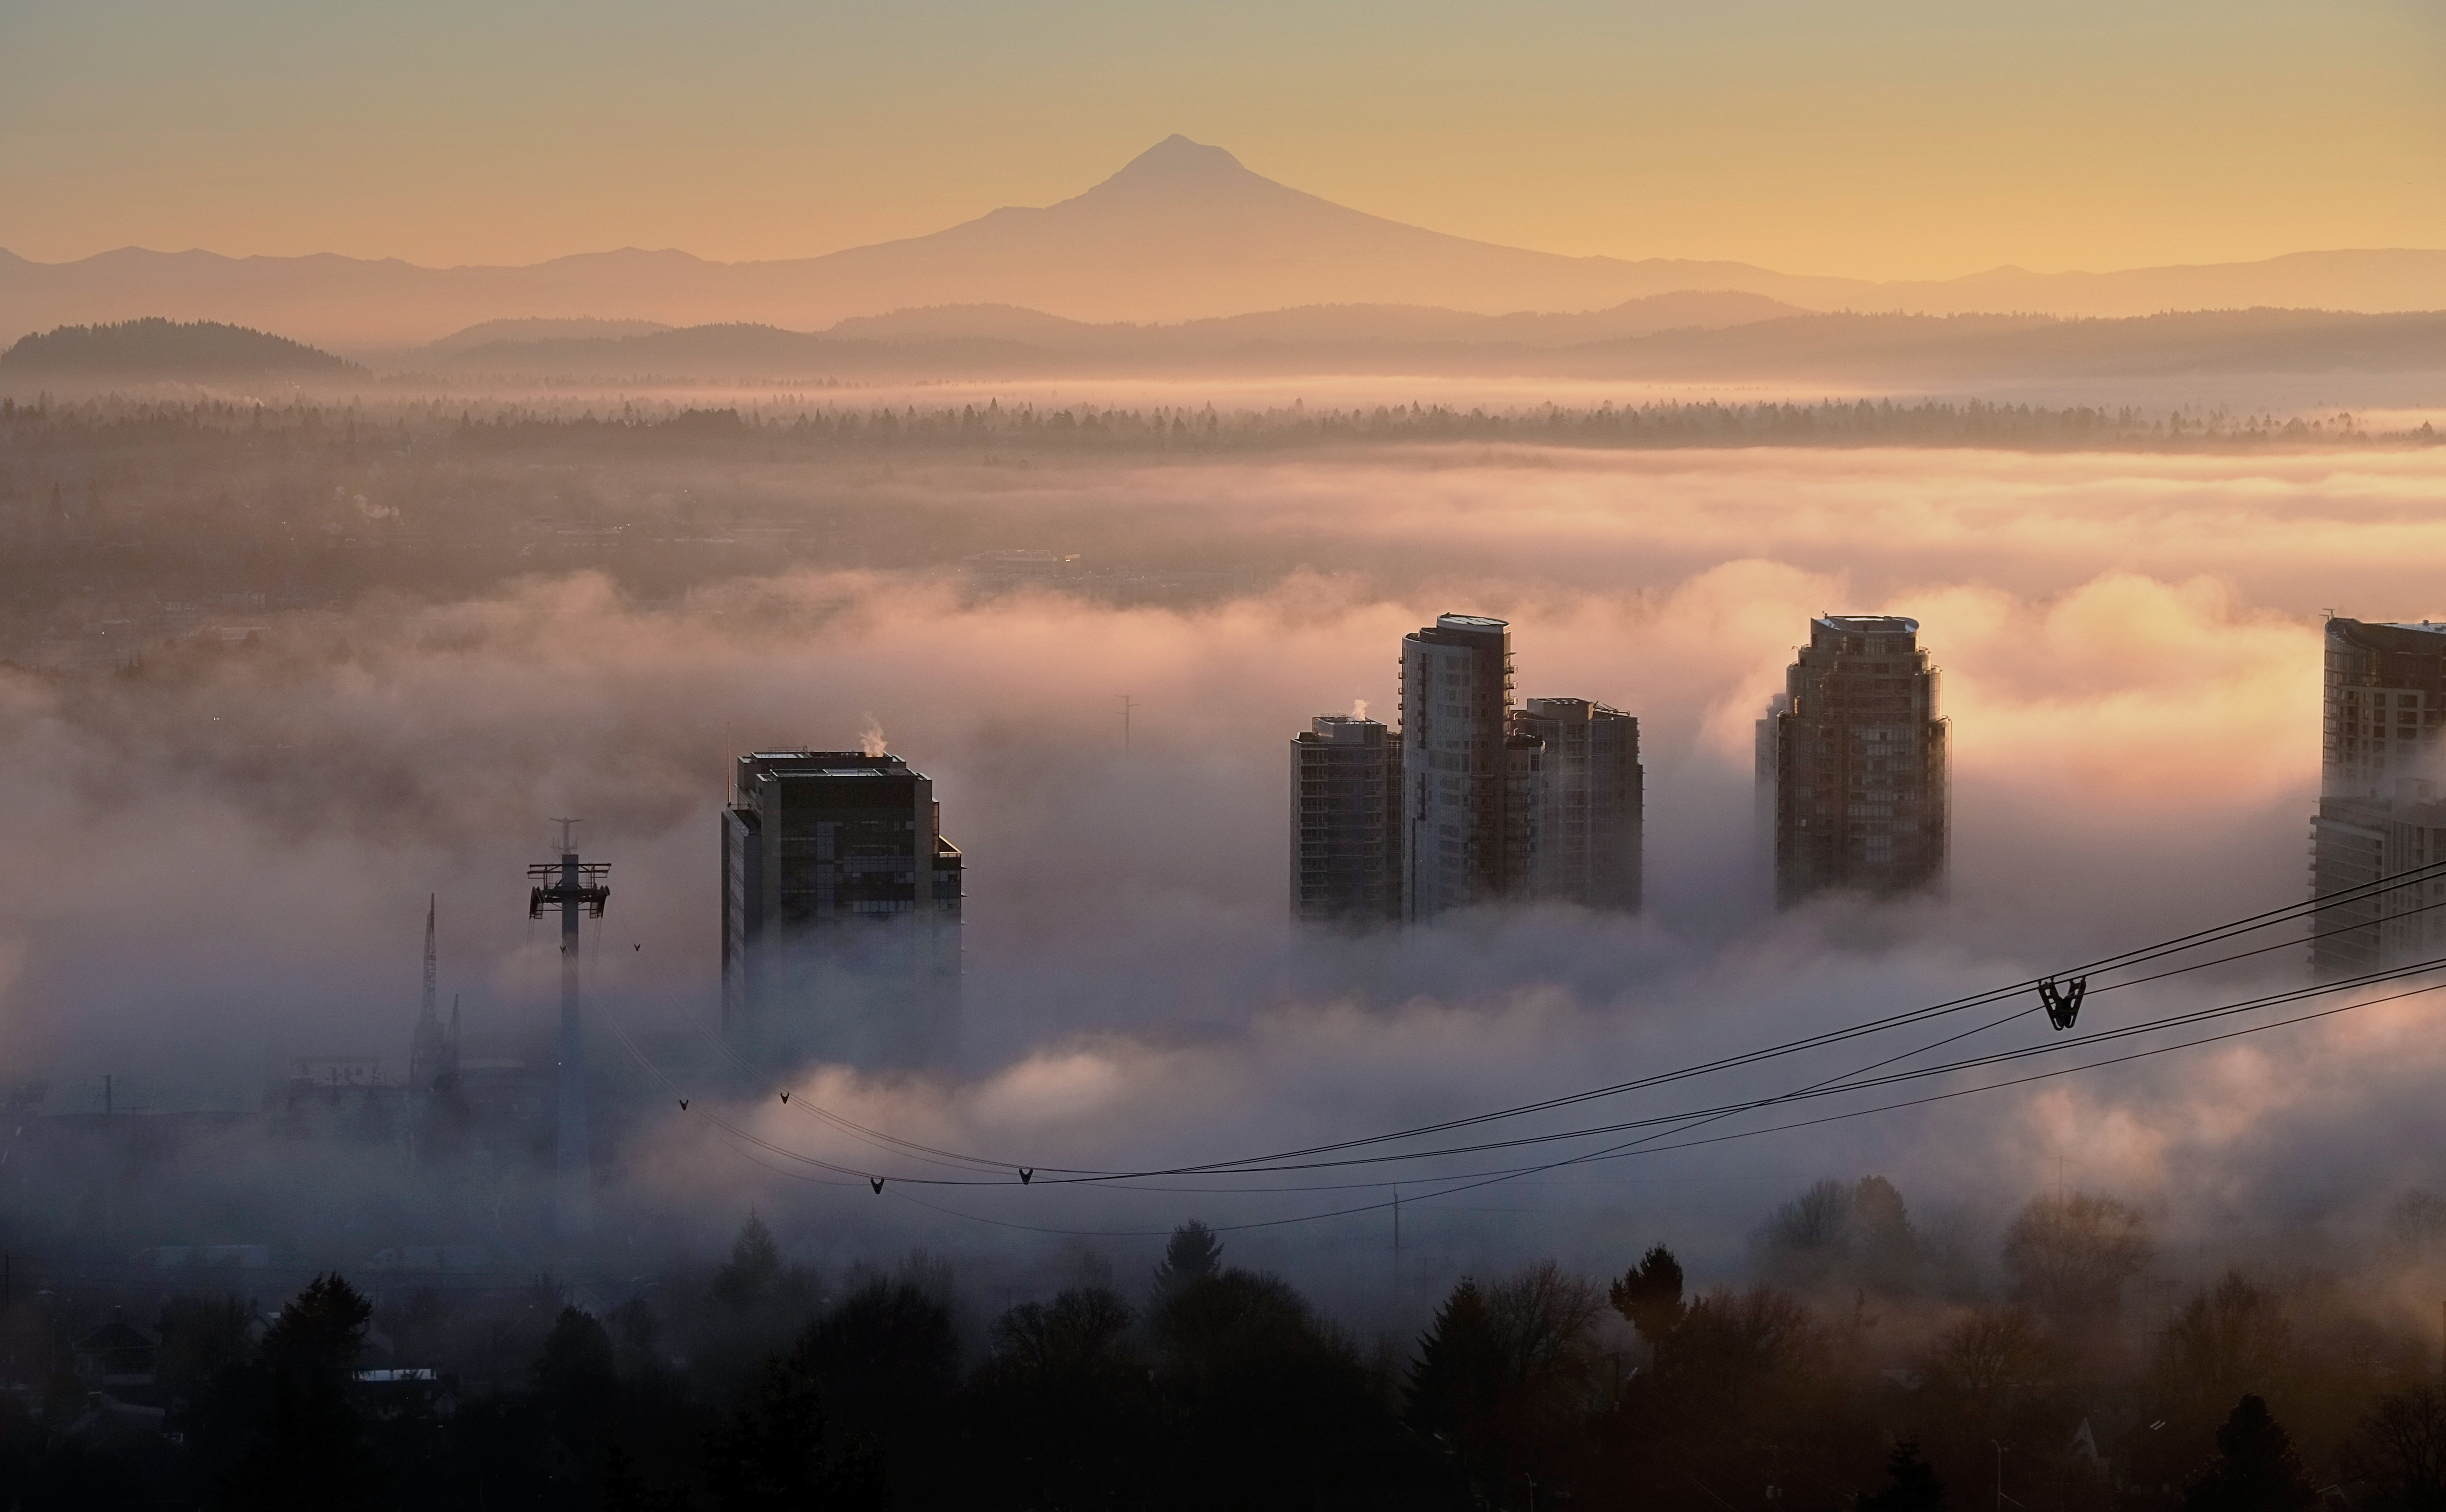 View of Mt Hood in the distance with fog over the South Waterfront